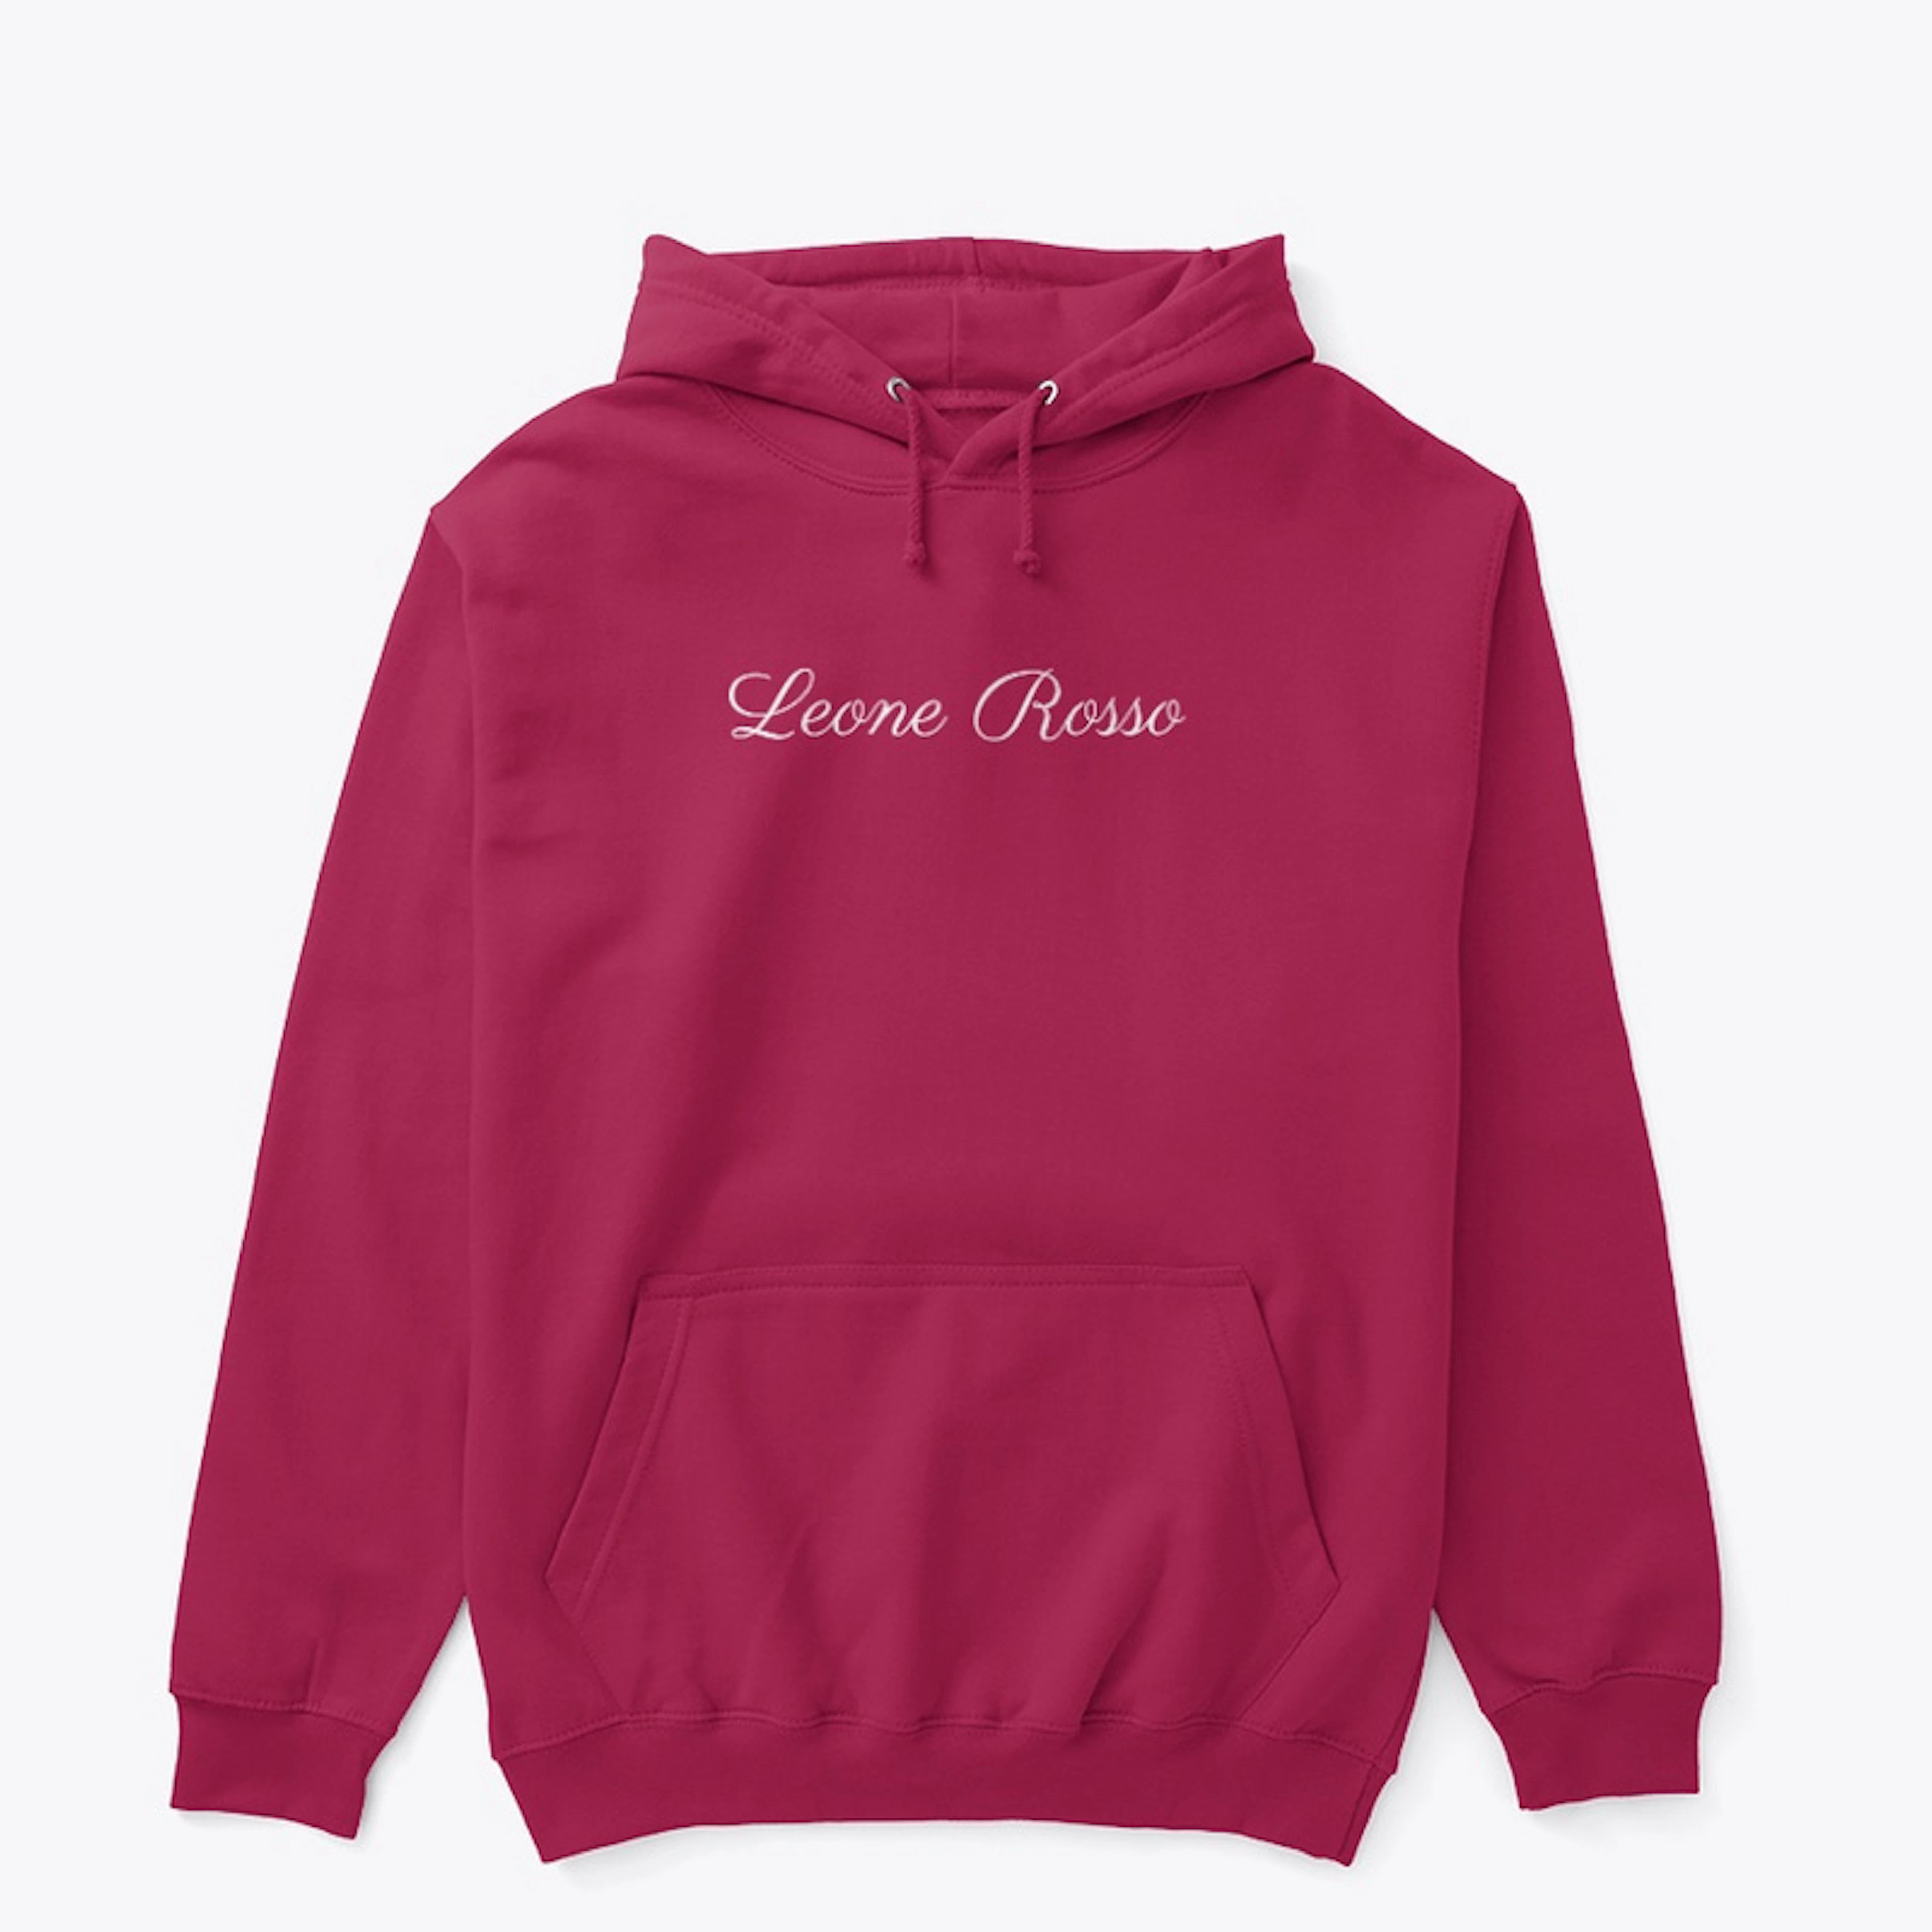 Leone Rosso Hoodie